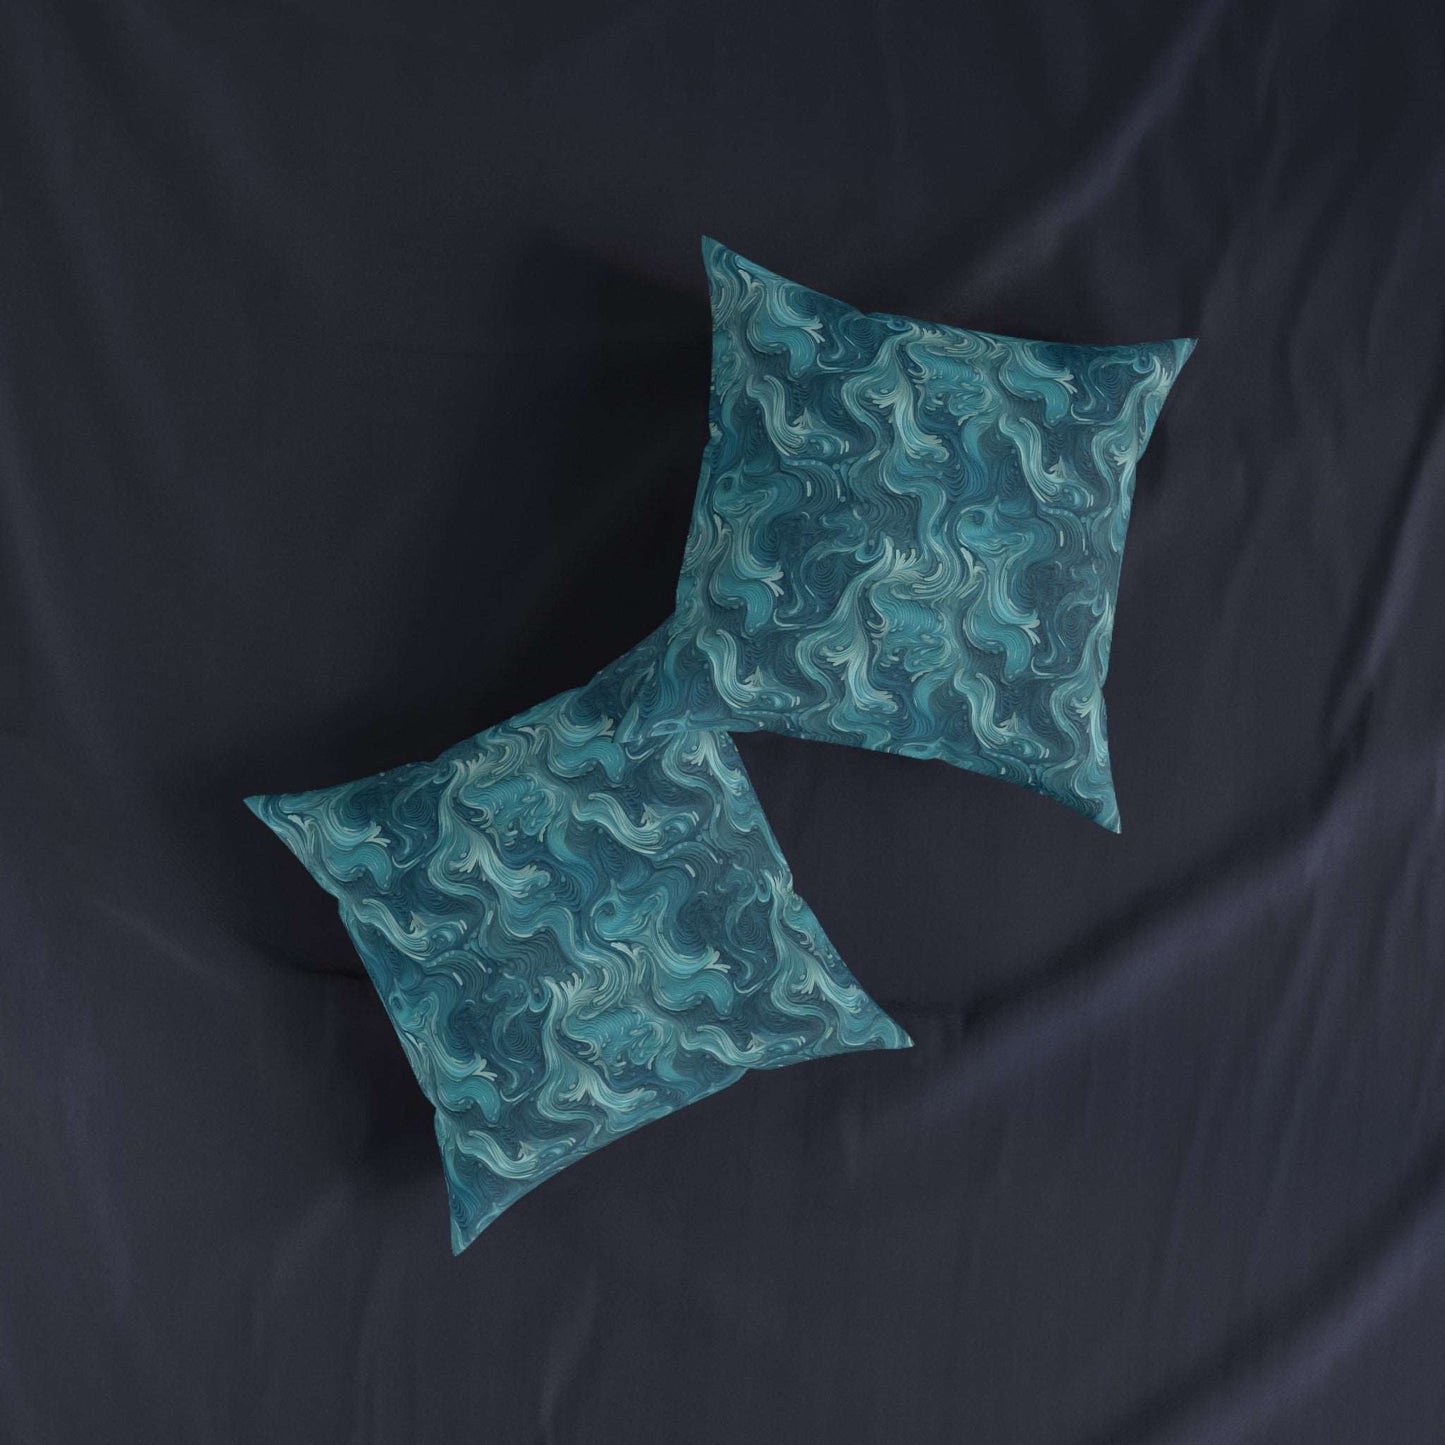 Azure Depths - Layered Blue Topographic Design Sofa and Chair Cushion - Pattern Symphony